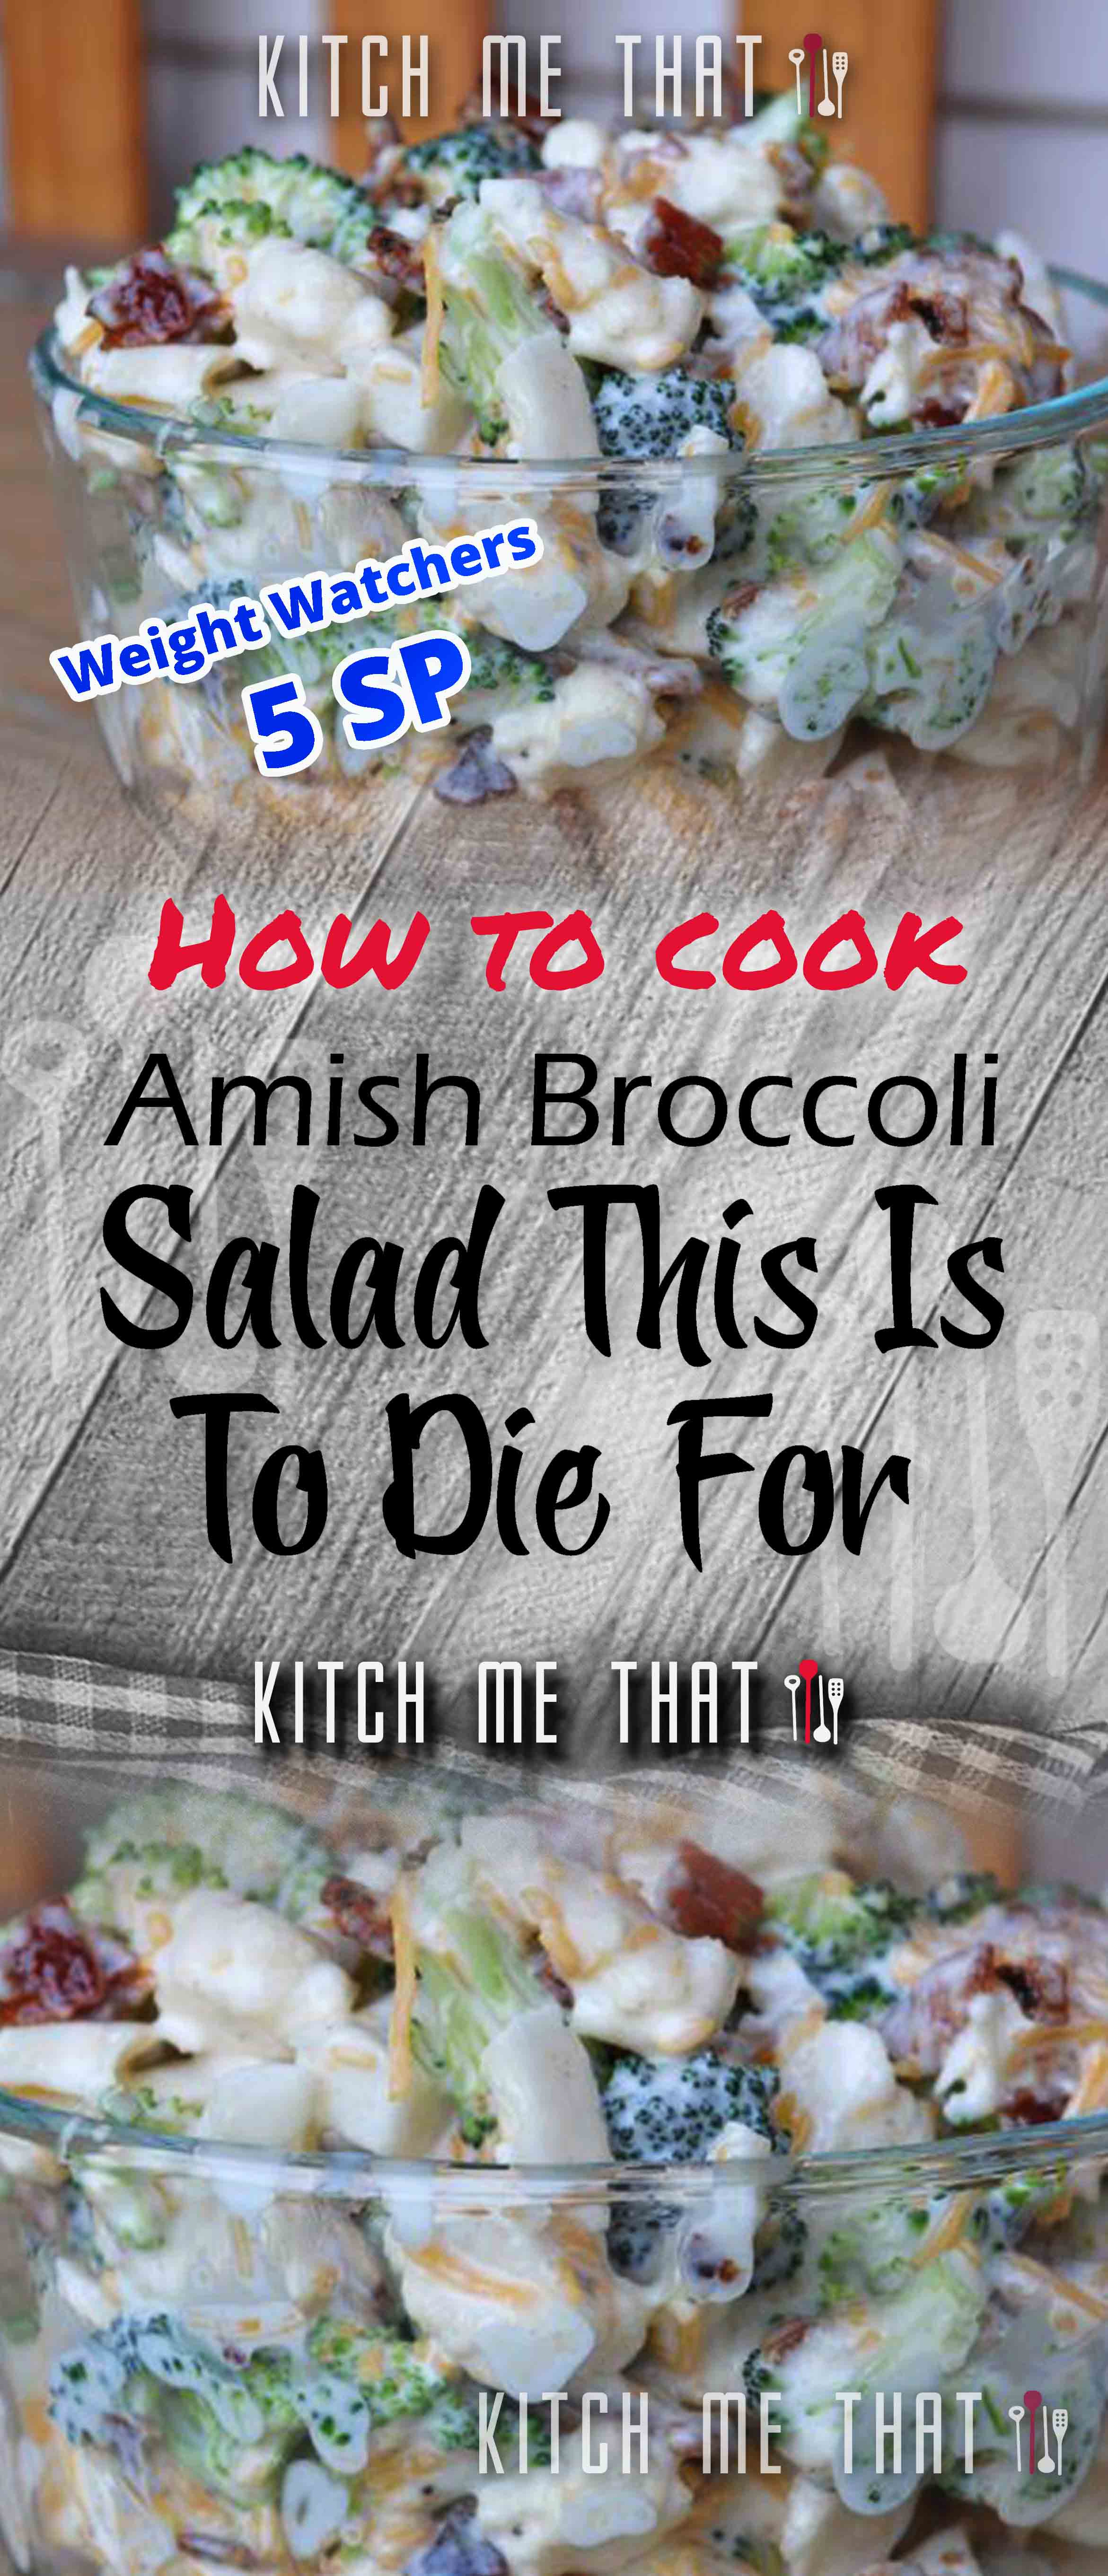 Exclusive Amish Broccoli Salad… This Is To Die For… NEW 2021